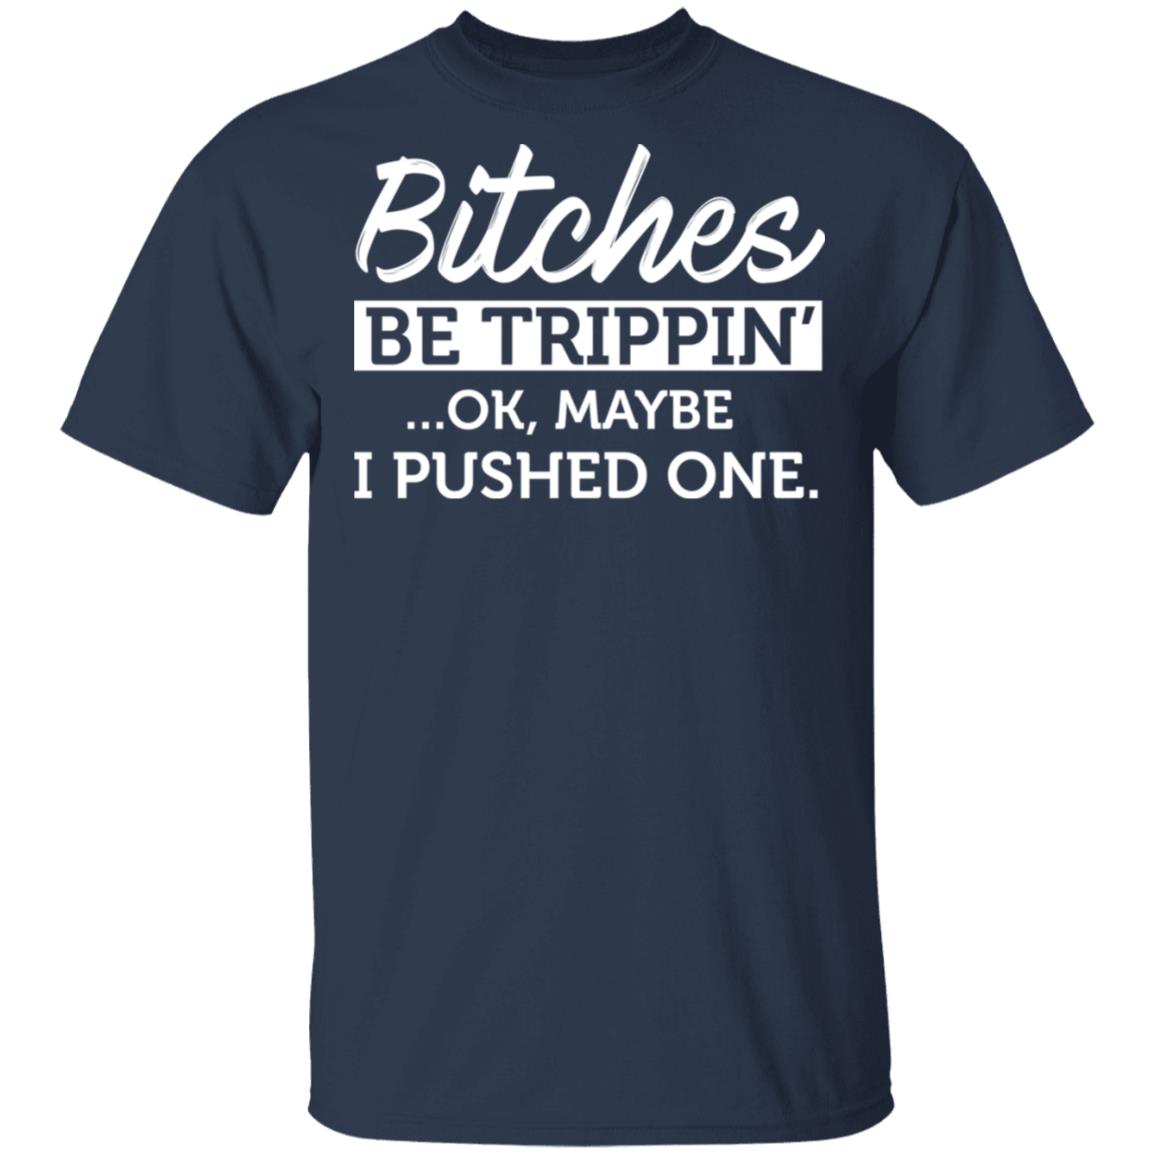 Maybe I Pushed One T-shirt Funny Attitude Hipster Sarcastic Tee Shirt Bitches Be Trippin' Okay